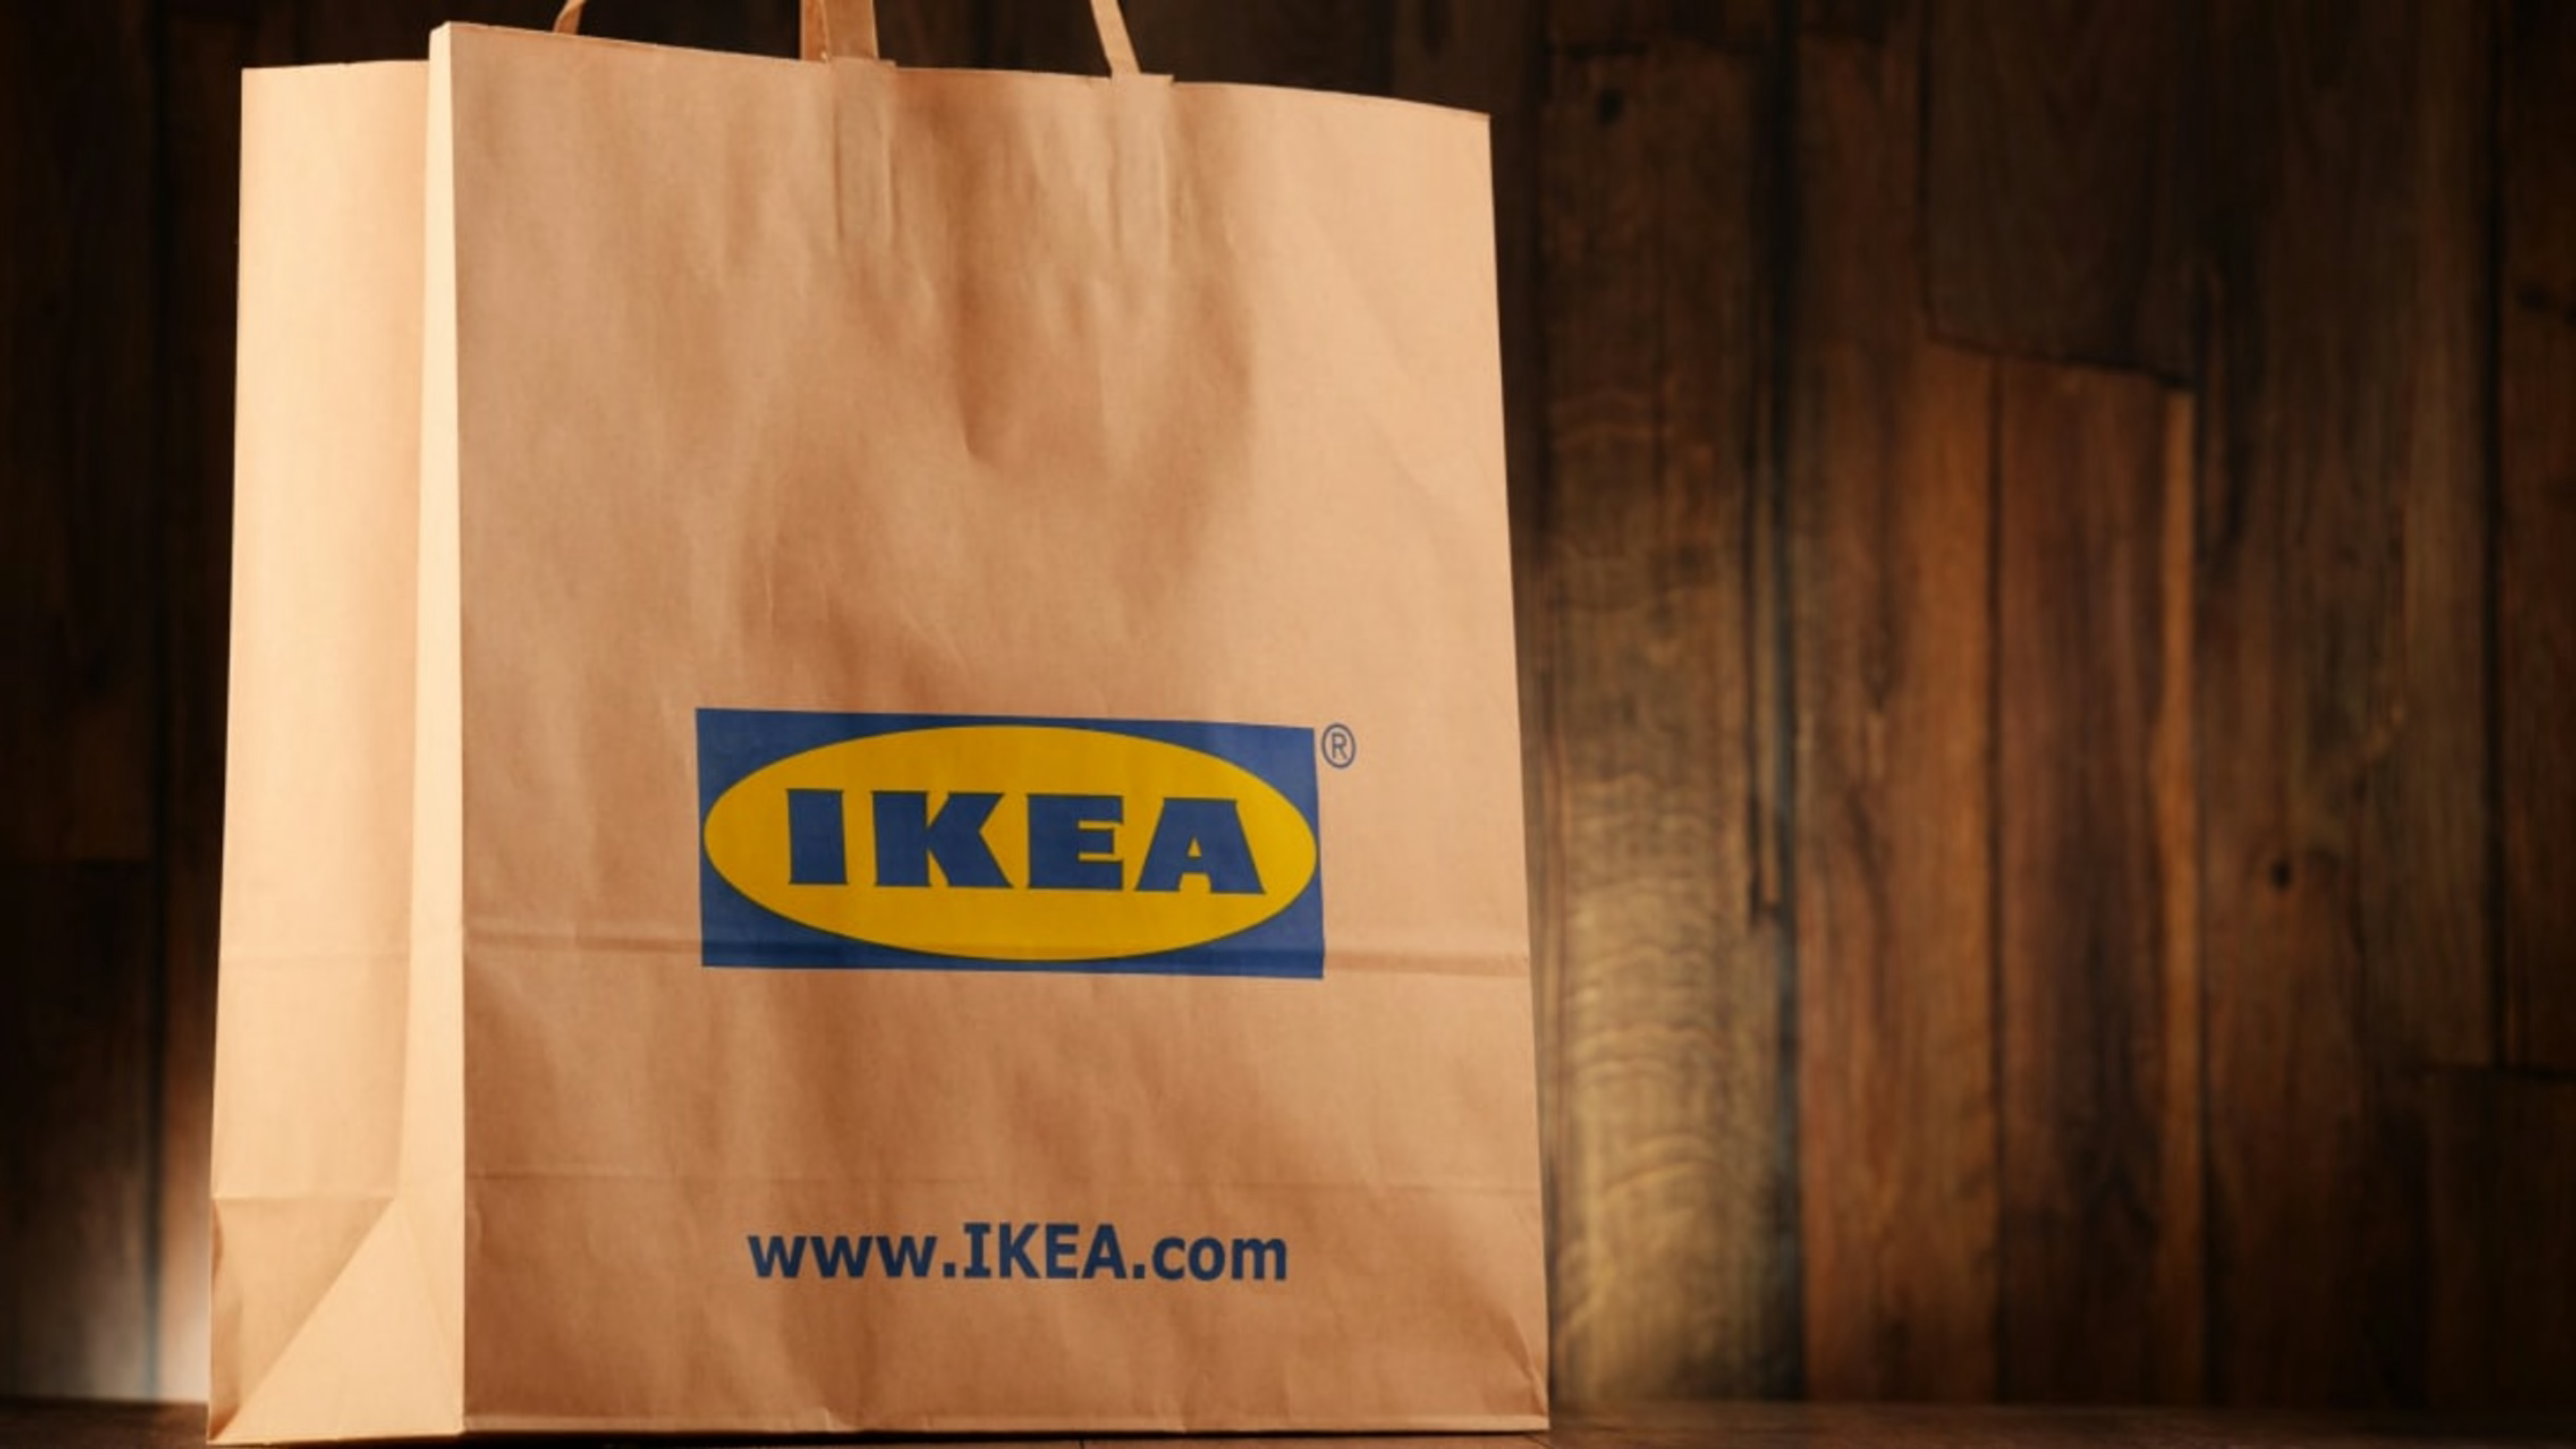 How IKEA Comes Up With Its Product Names